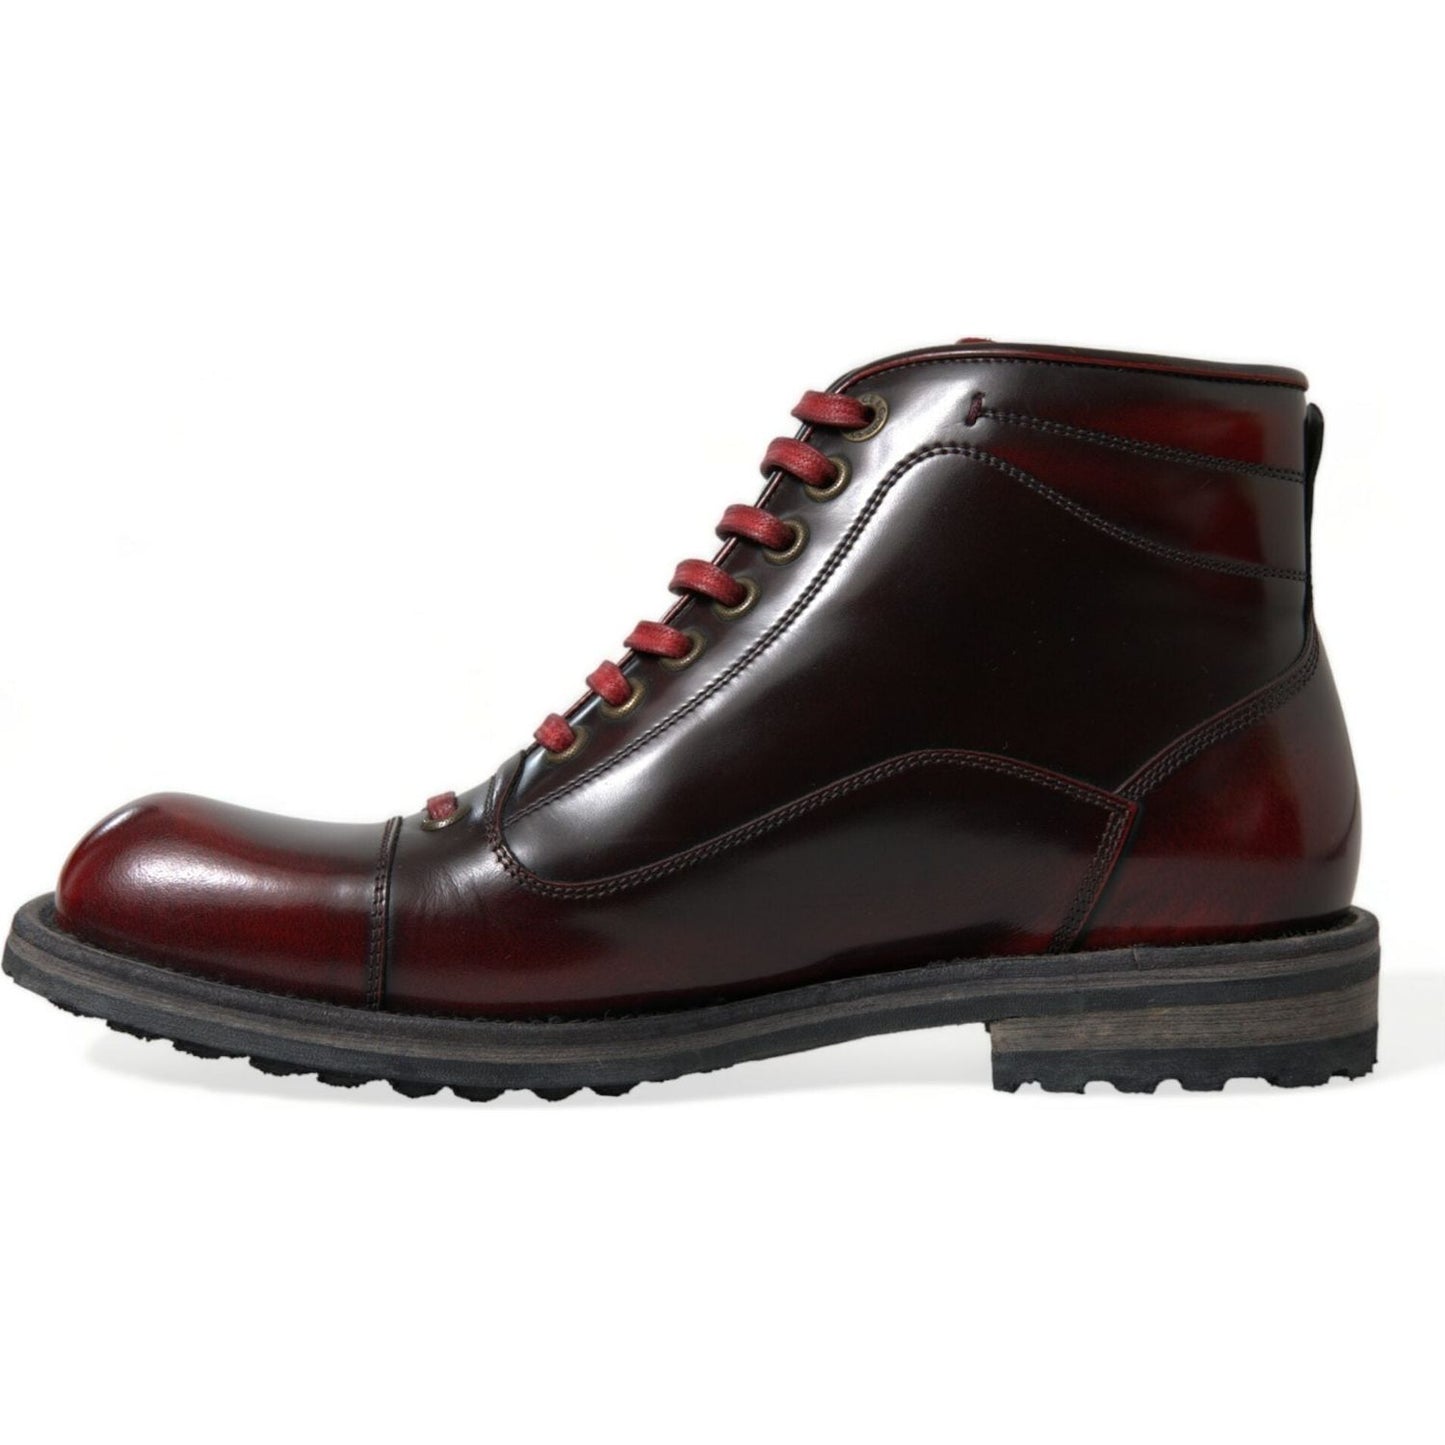 Dolce & Gabbana Dapper Dual-Tone Leather Ankle Boots black-red-leather-lace-up-ankle-boots-shoes